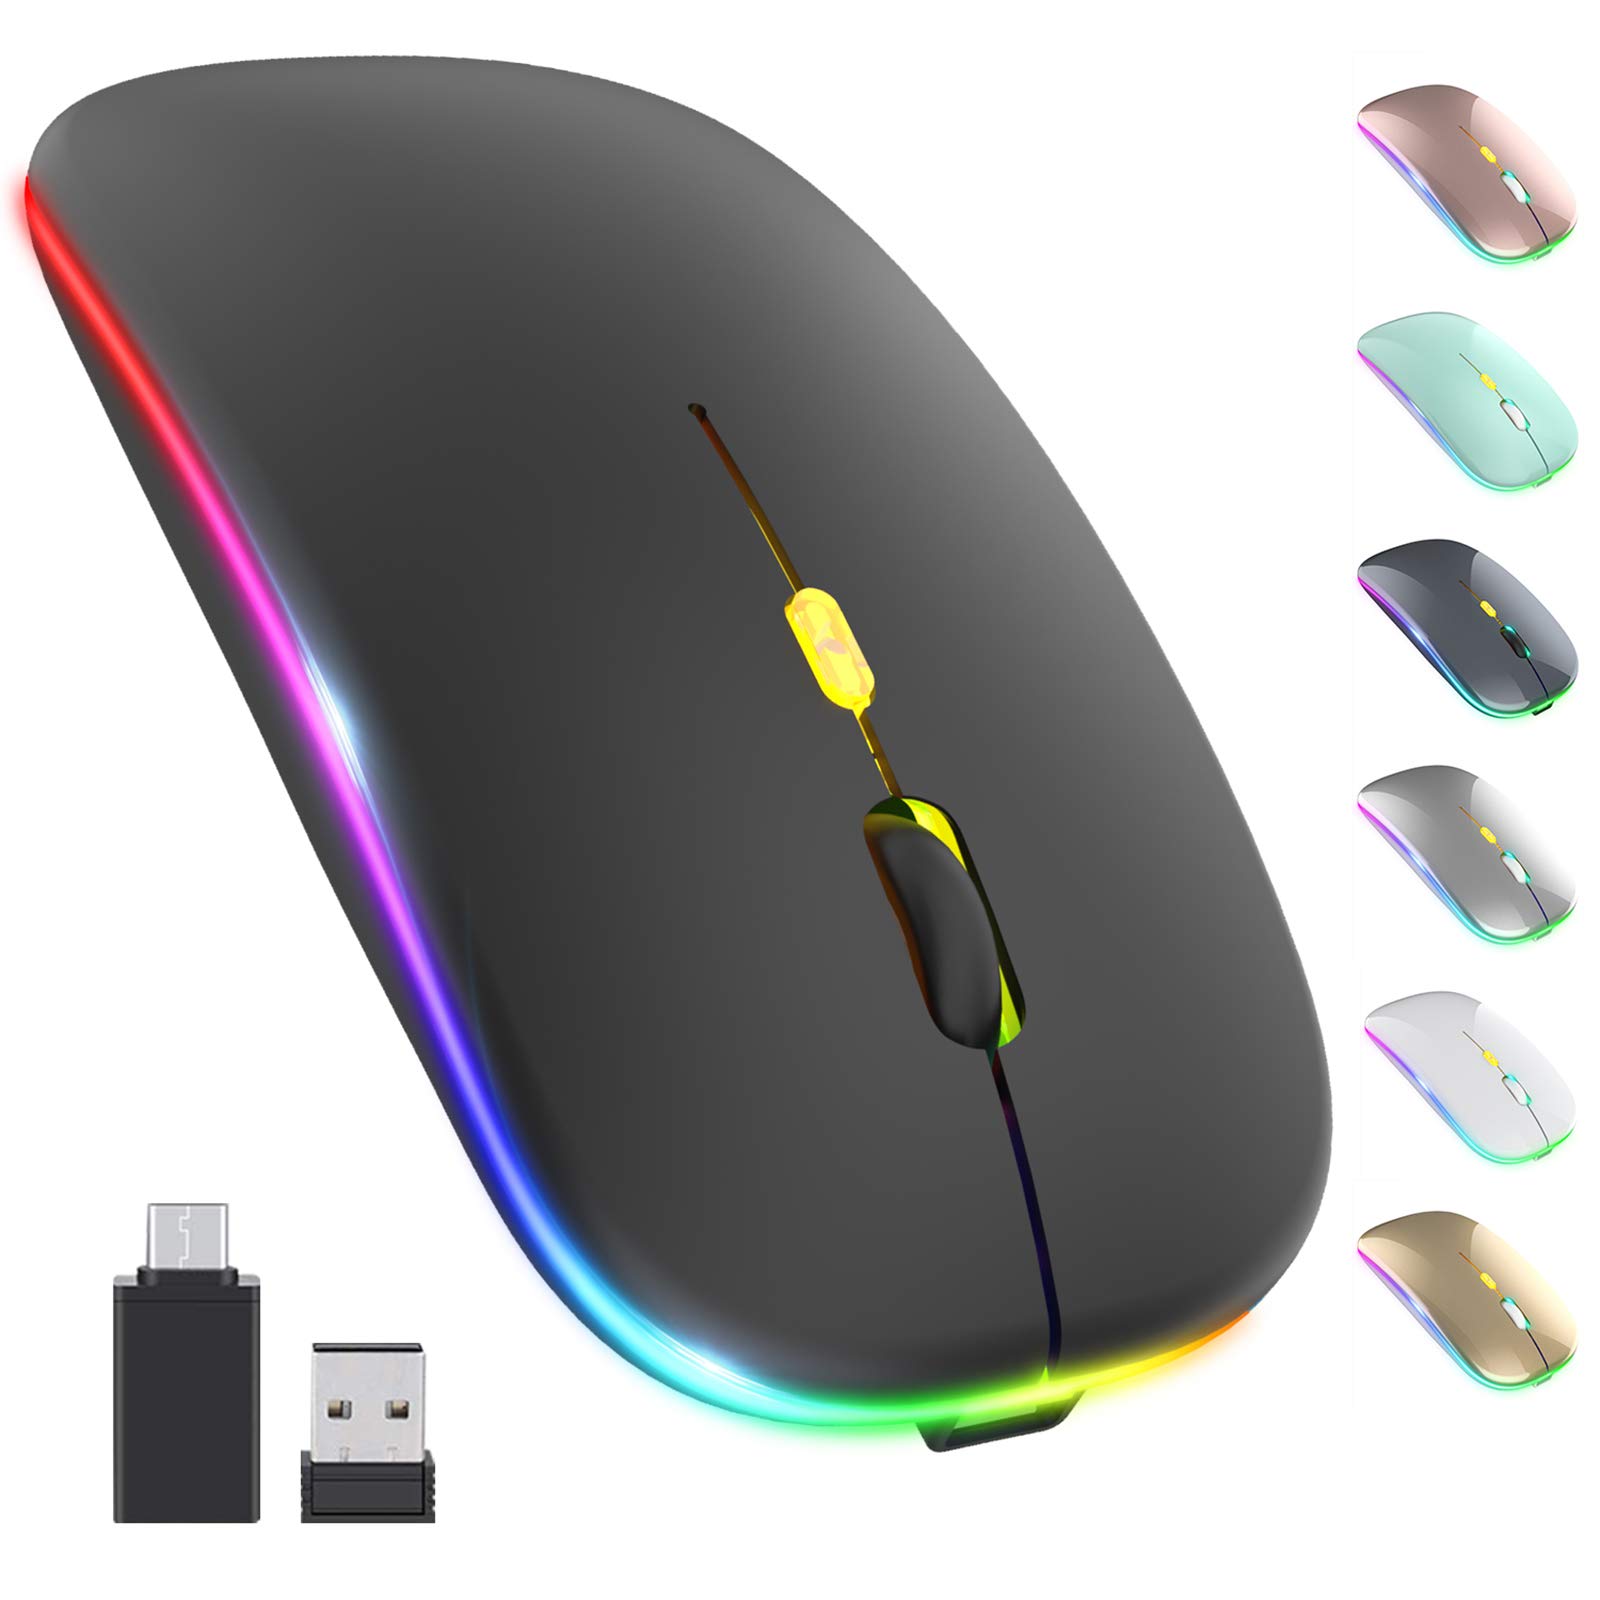 OKIMO Upgrade LED Wireless Mouse, Rechargeable Slim Silent Mouse 24g Portable Mobile Optical Office Mouse with USB & Type-c Re